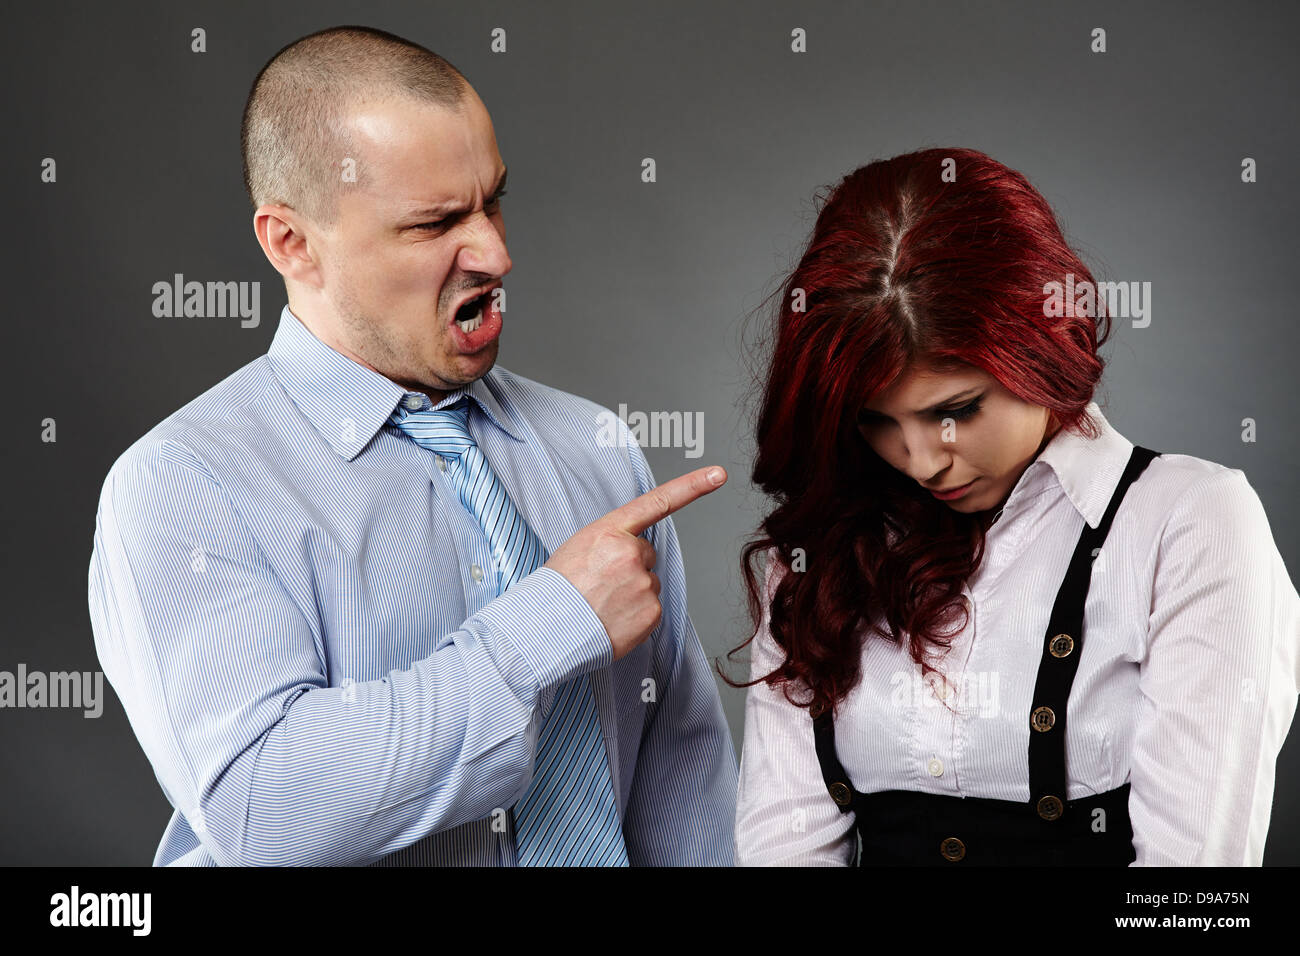 Boss angry on a new employee, shouting, threatening Stock Photo